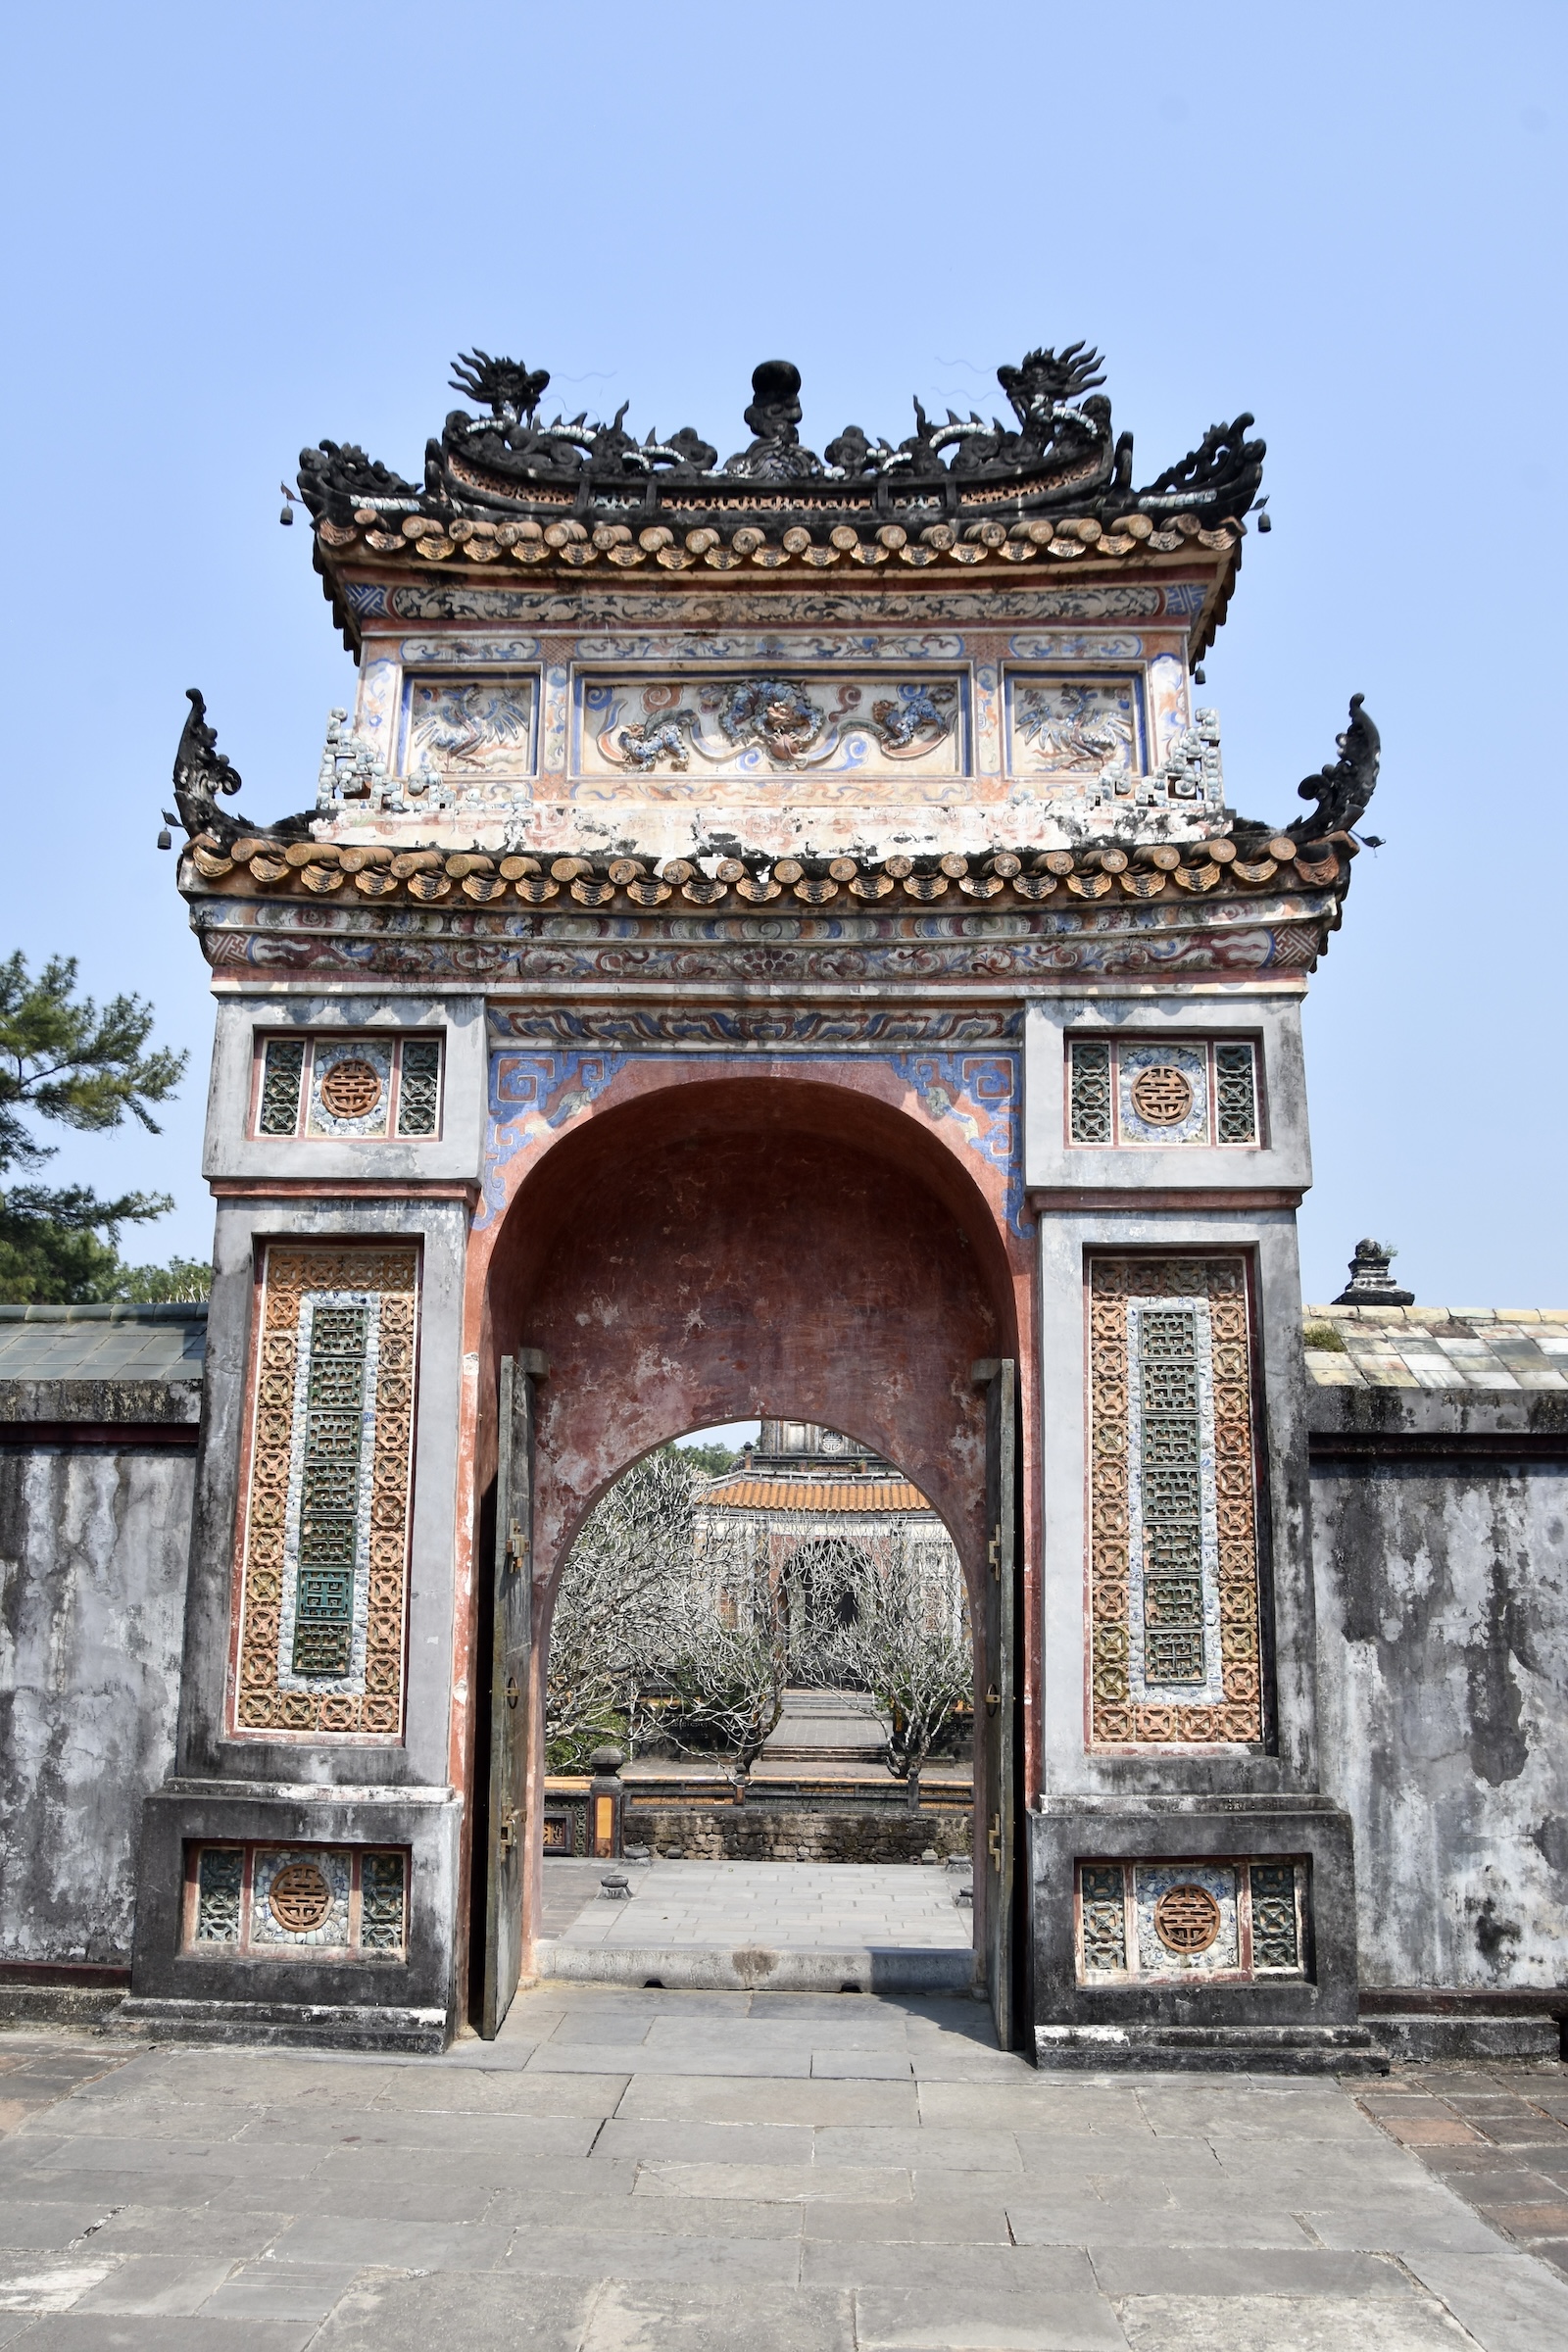 Entrance to Tu Duc's Tomb, Hue